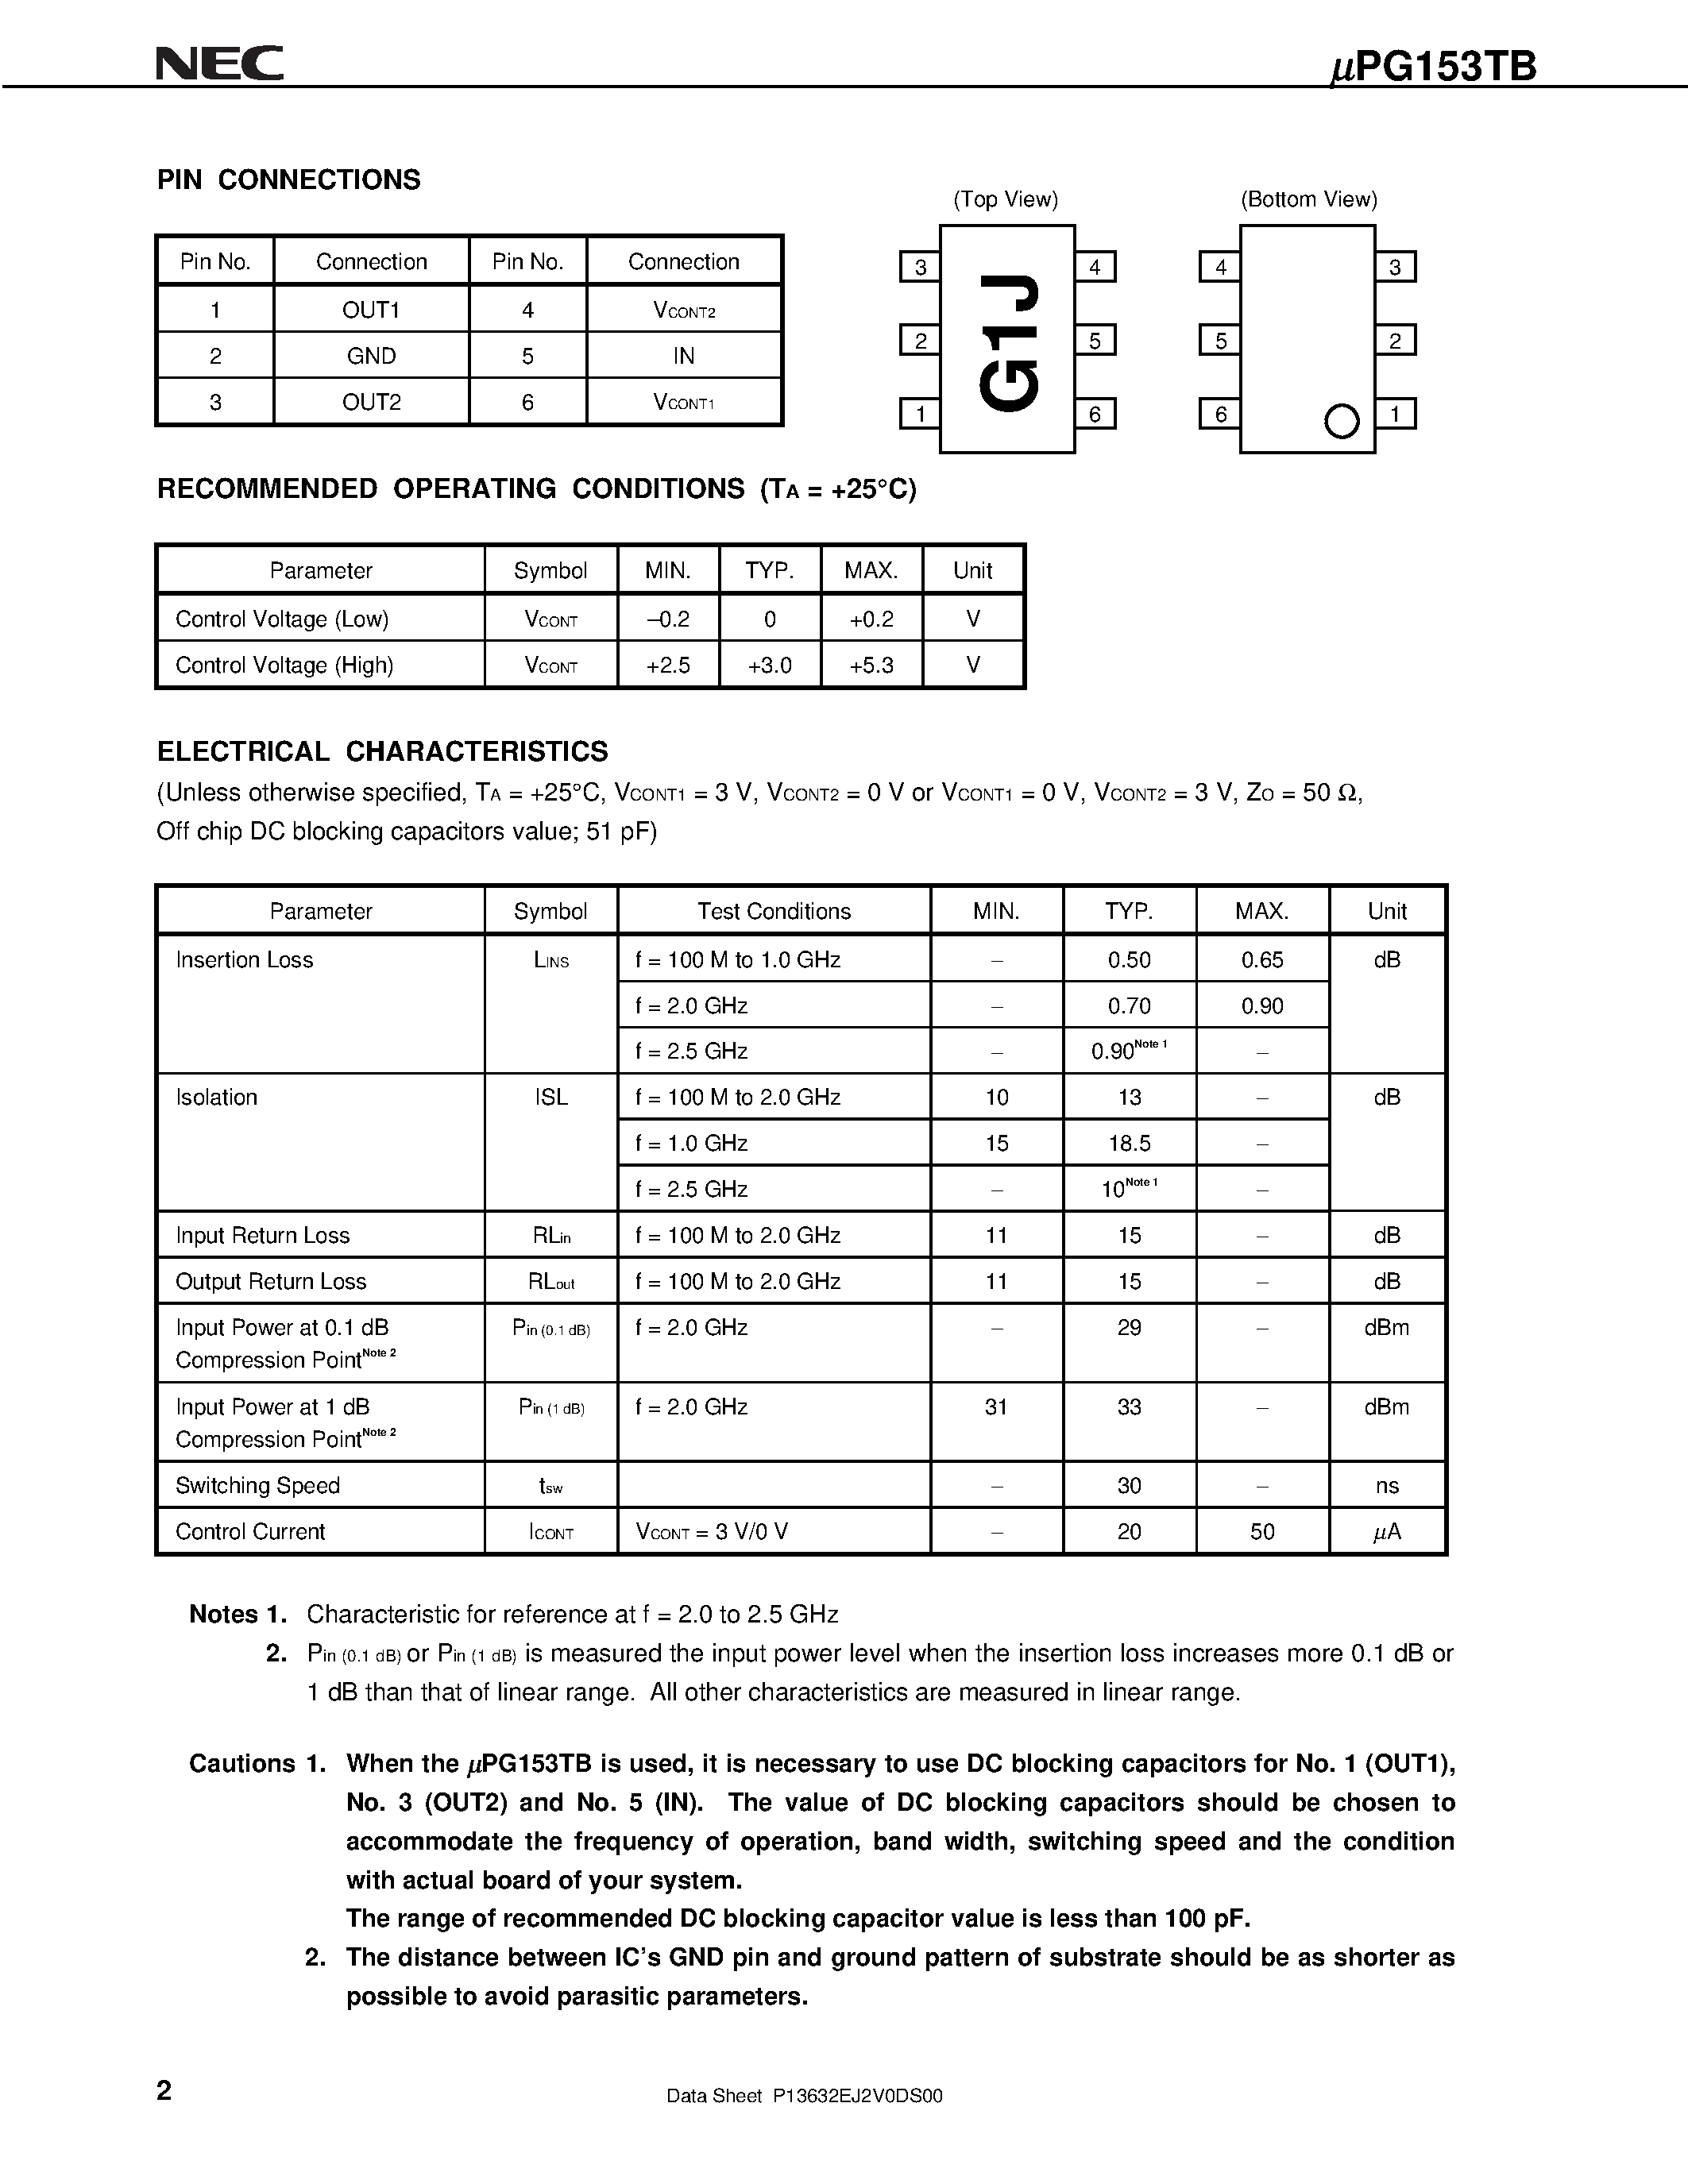 Datasheet UPG153TB-E3 - L-BAND SPDT SWITCH page 2